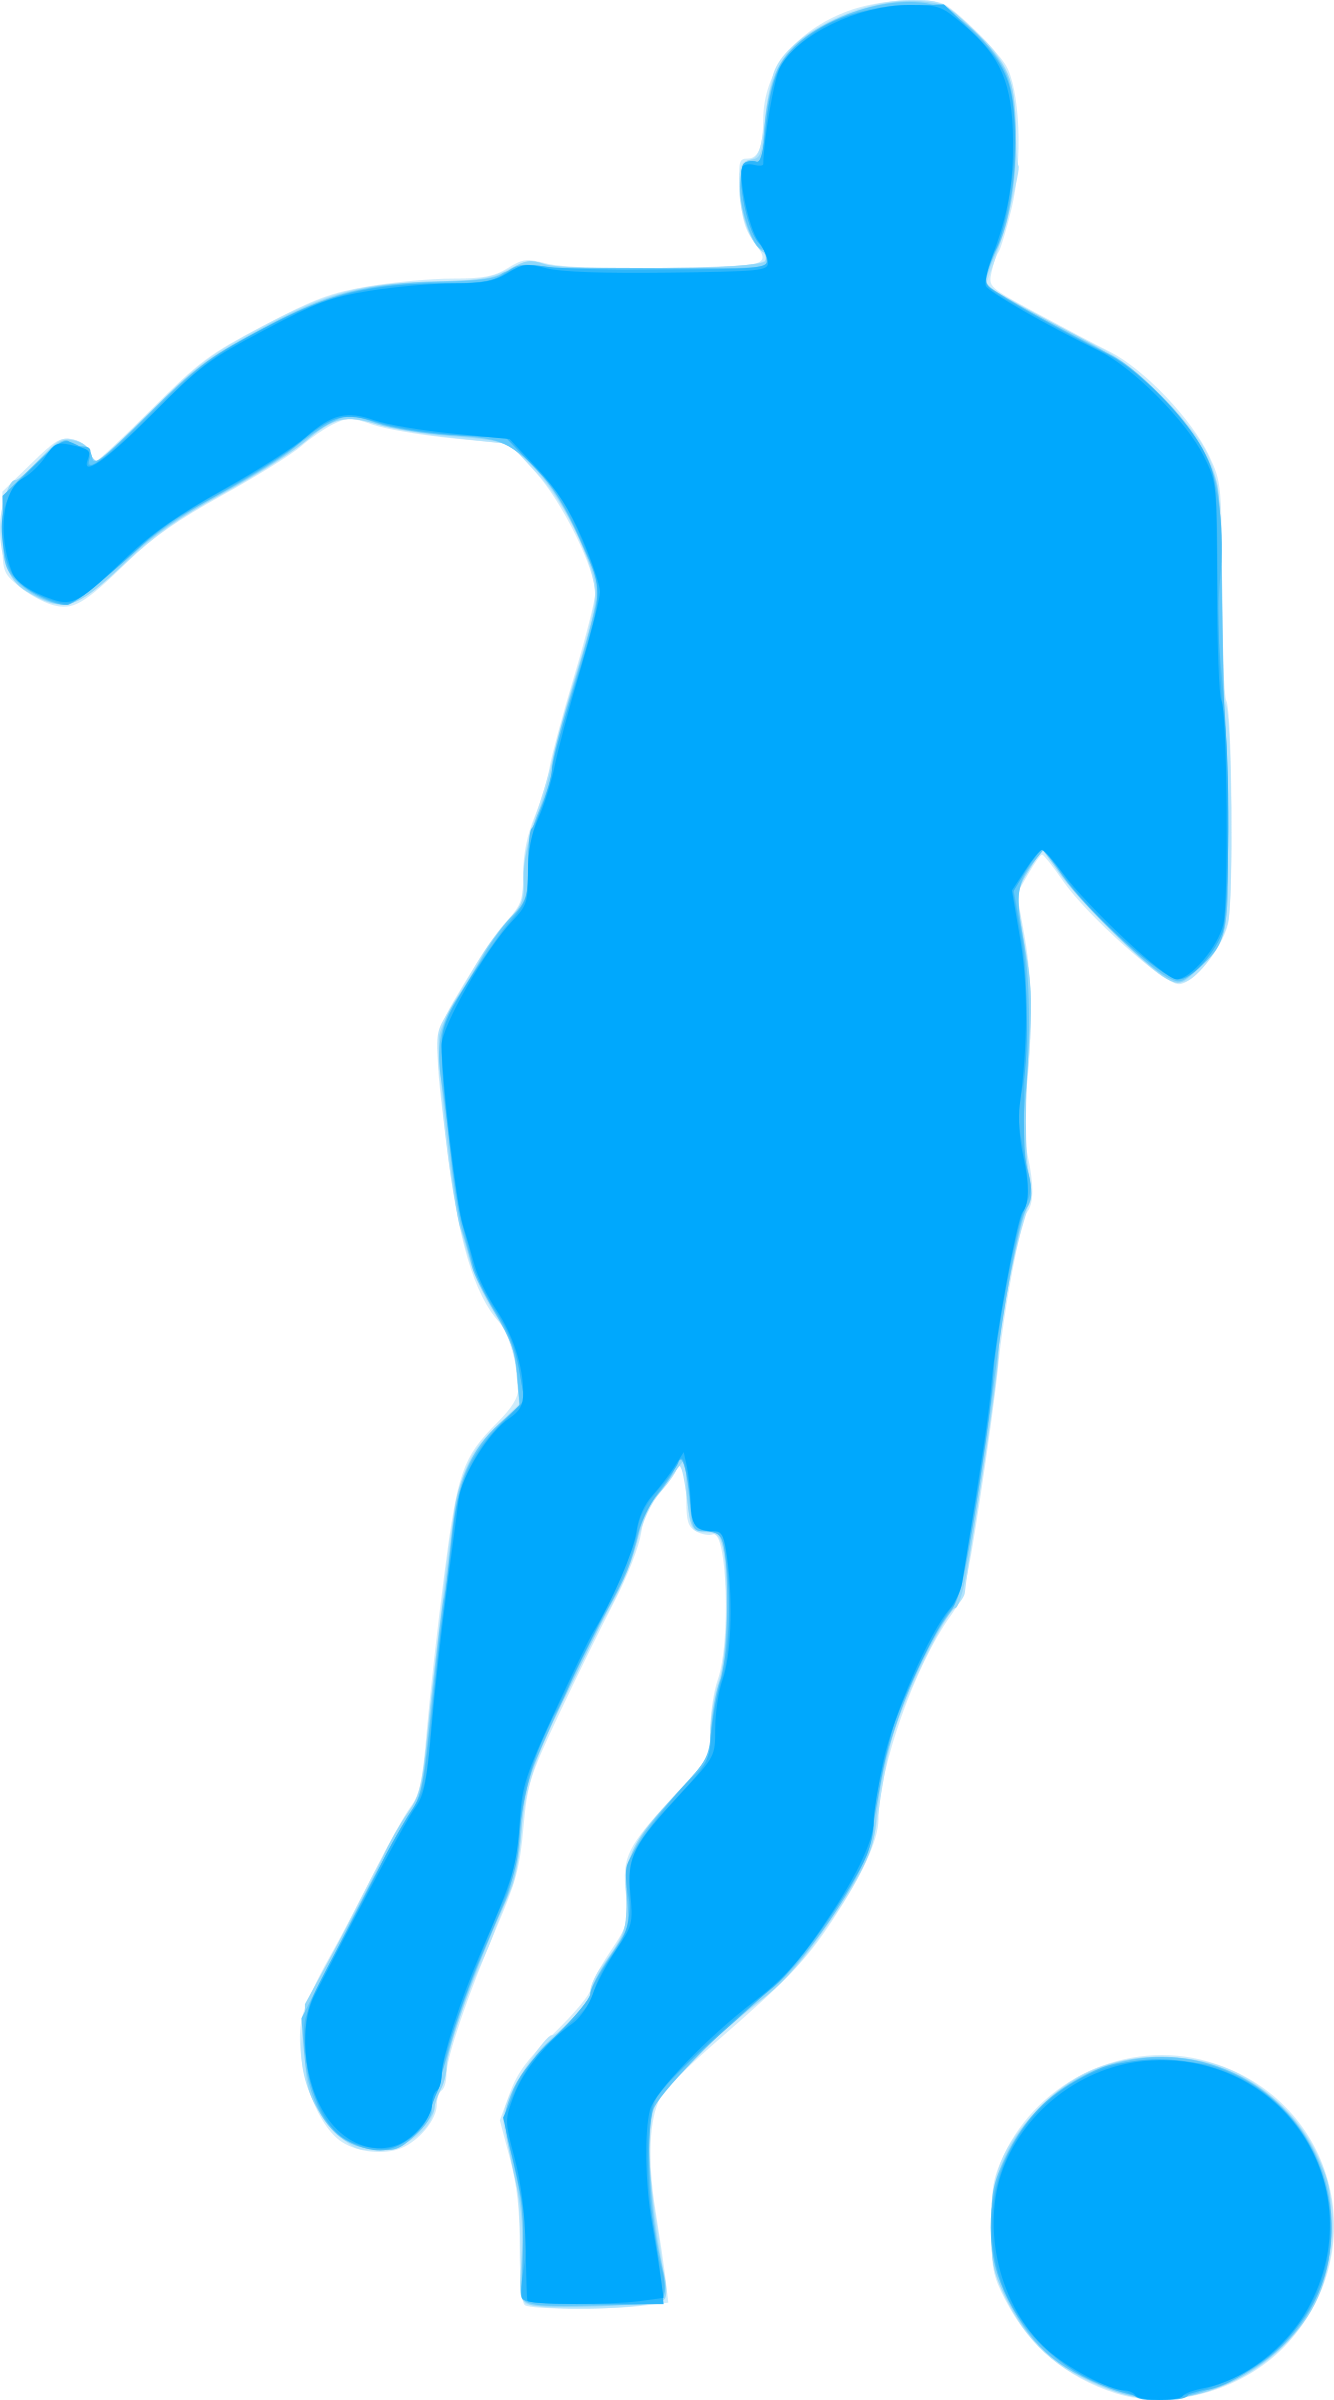 Silhouette Football 27 - Football Icon Png (1334x2400)